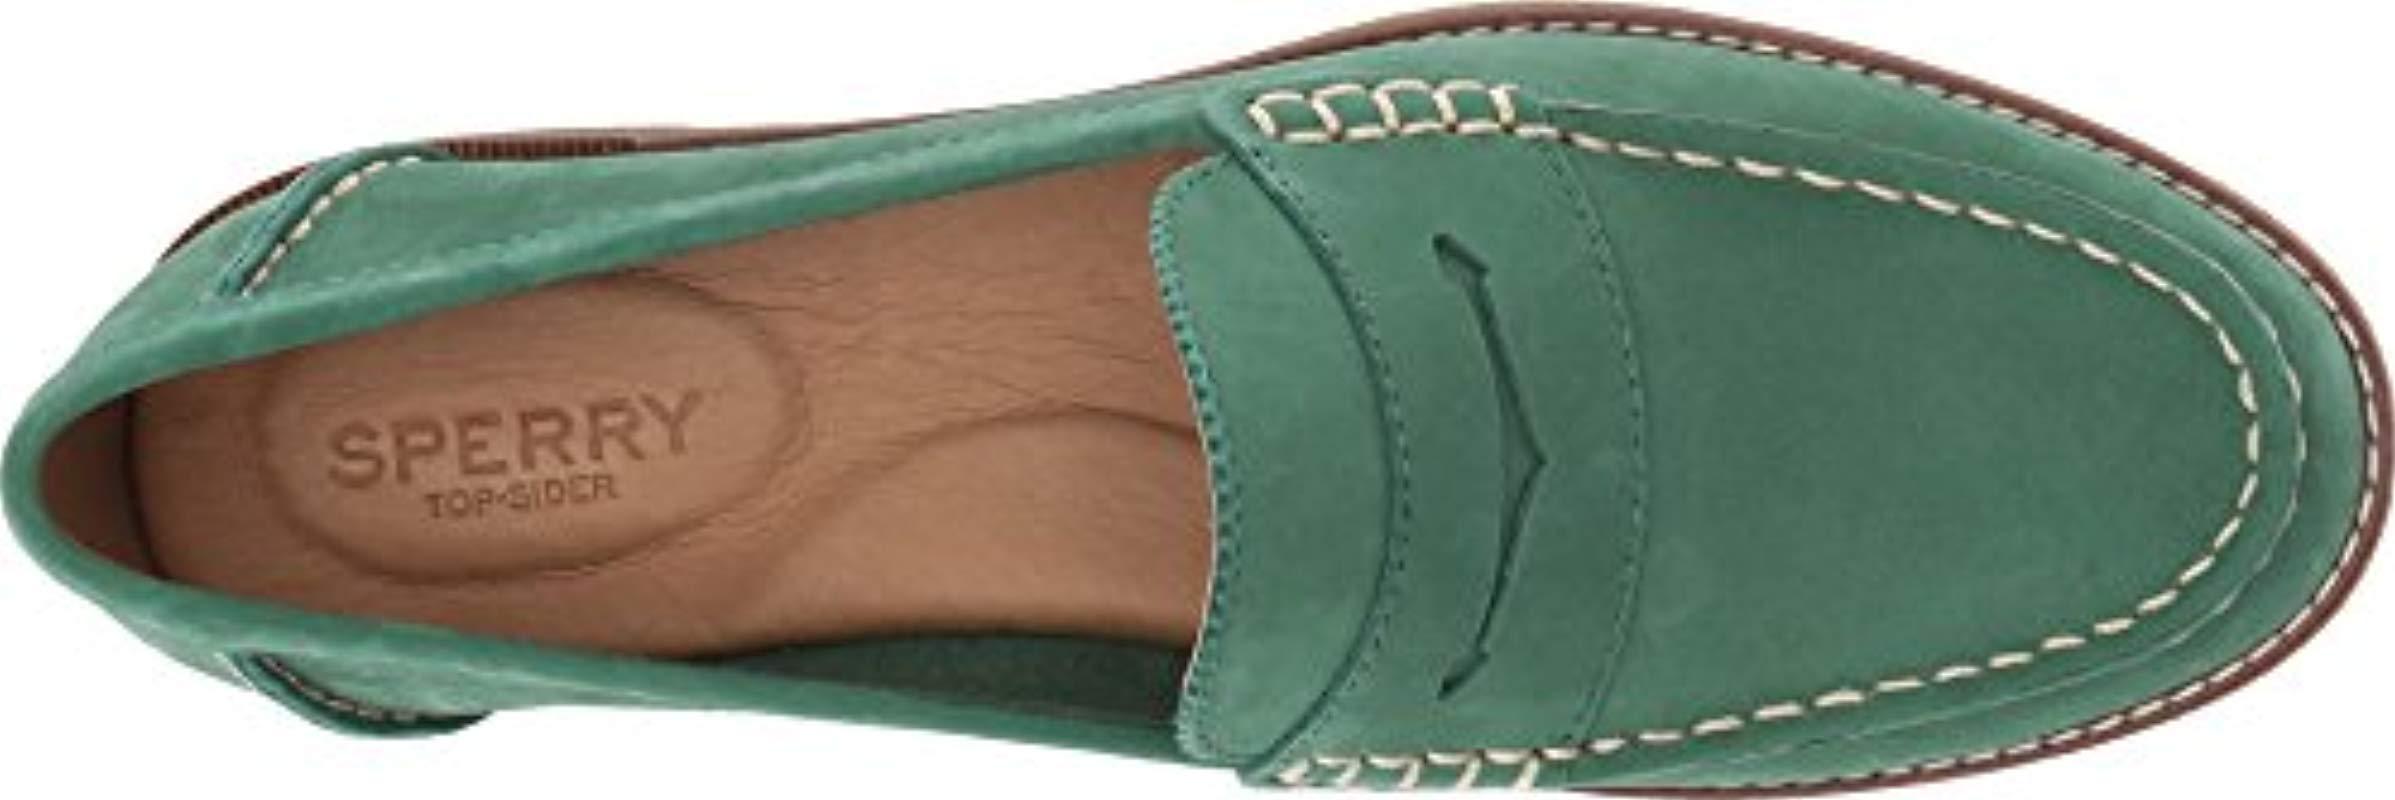 Sperry Top-Sider Rubber Seaport Penny 